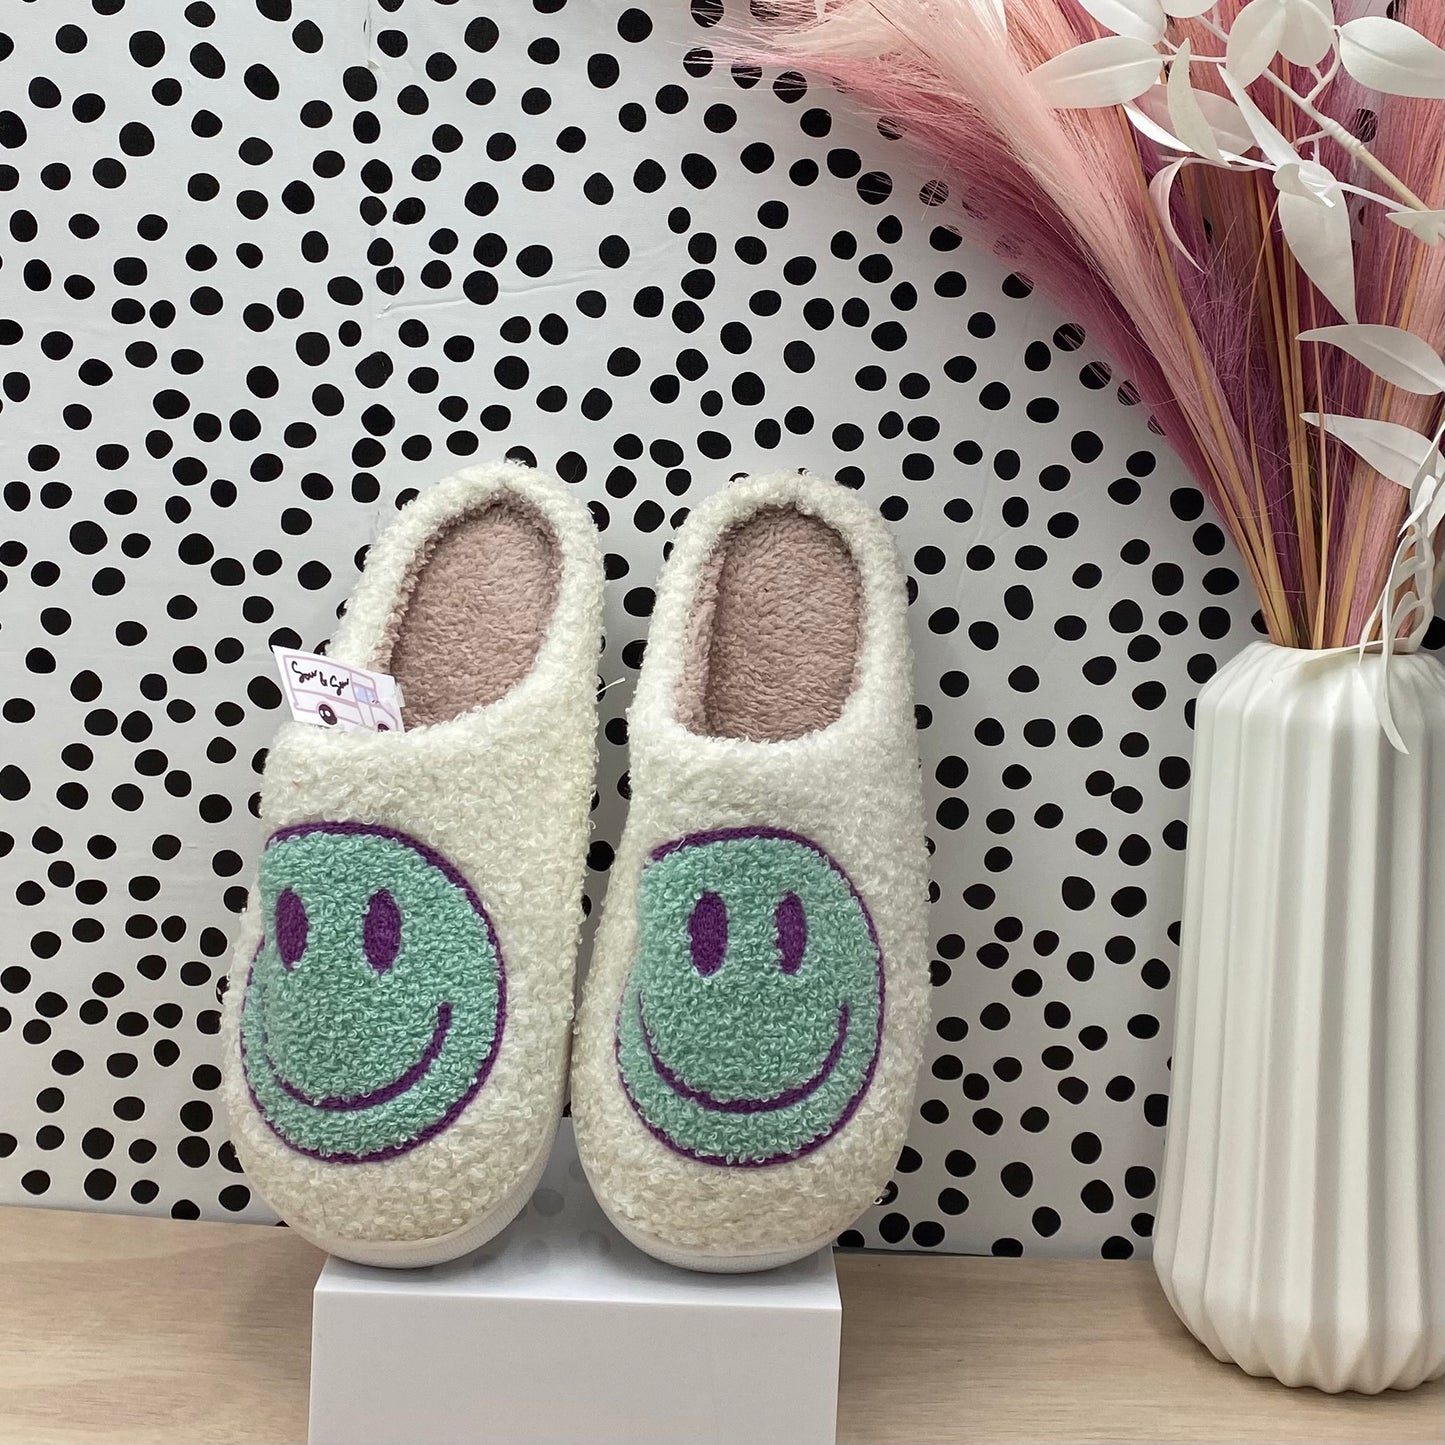 White & Teal Sherpa Smiley Face Closed Toe Slippers